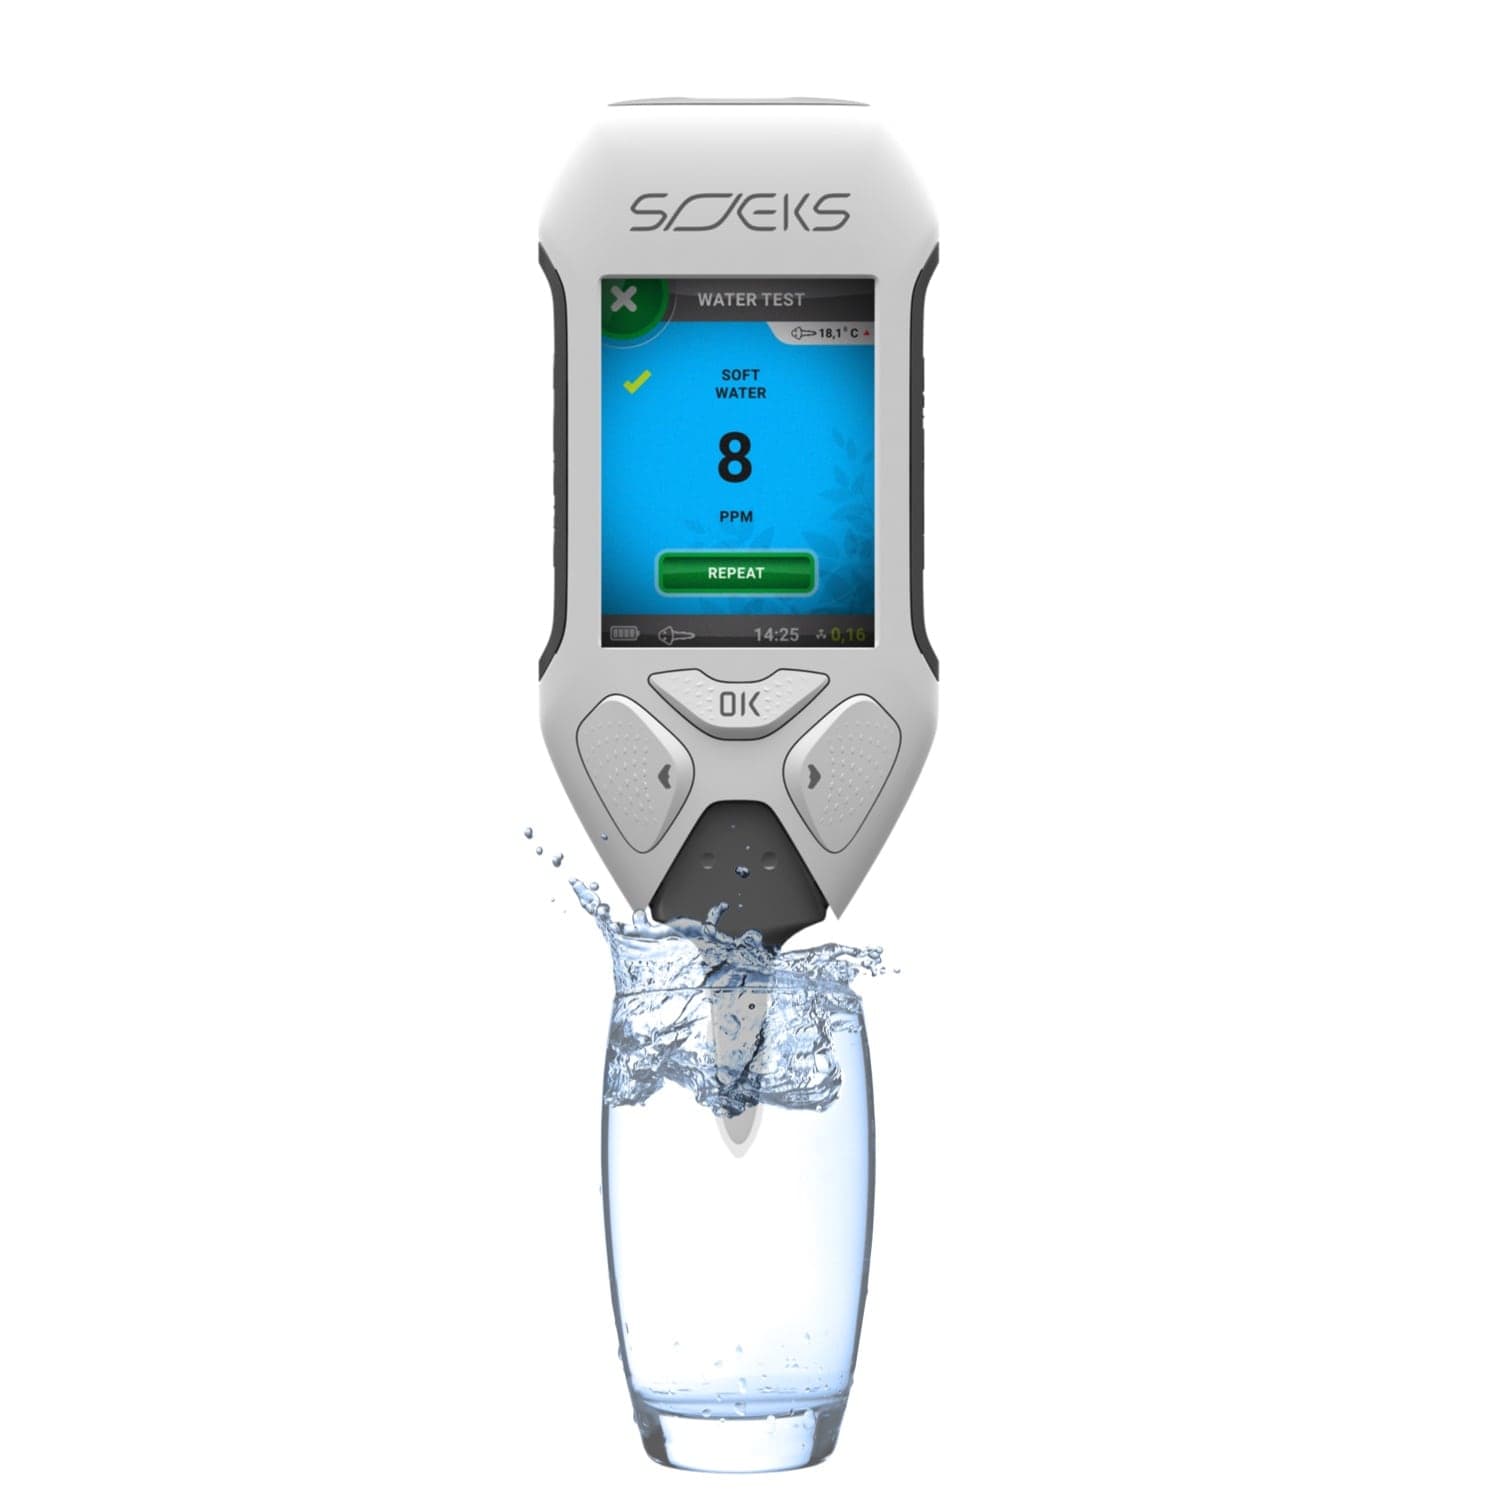 EcoVisor F4 - Determine the quality of Water in glass